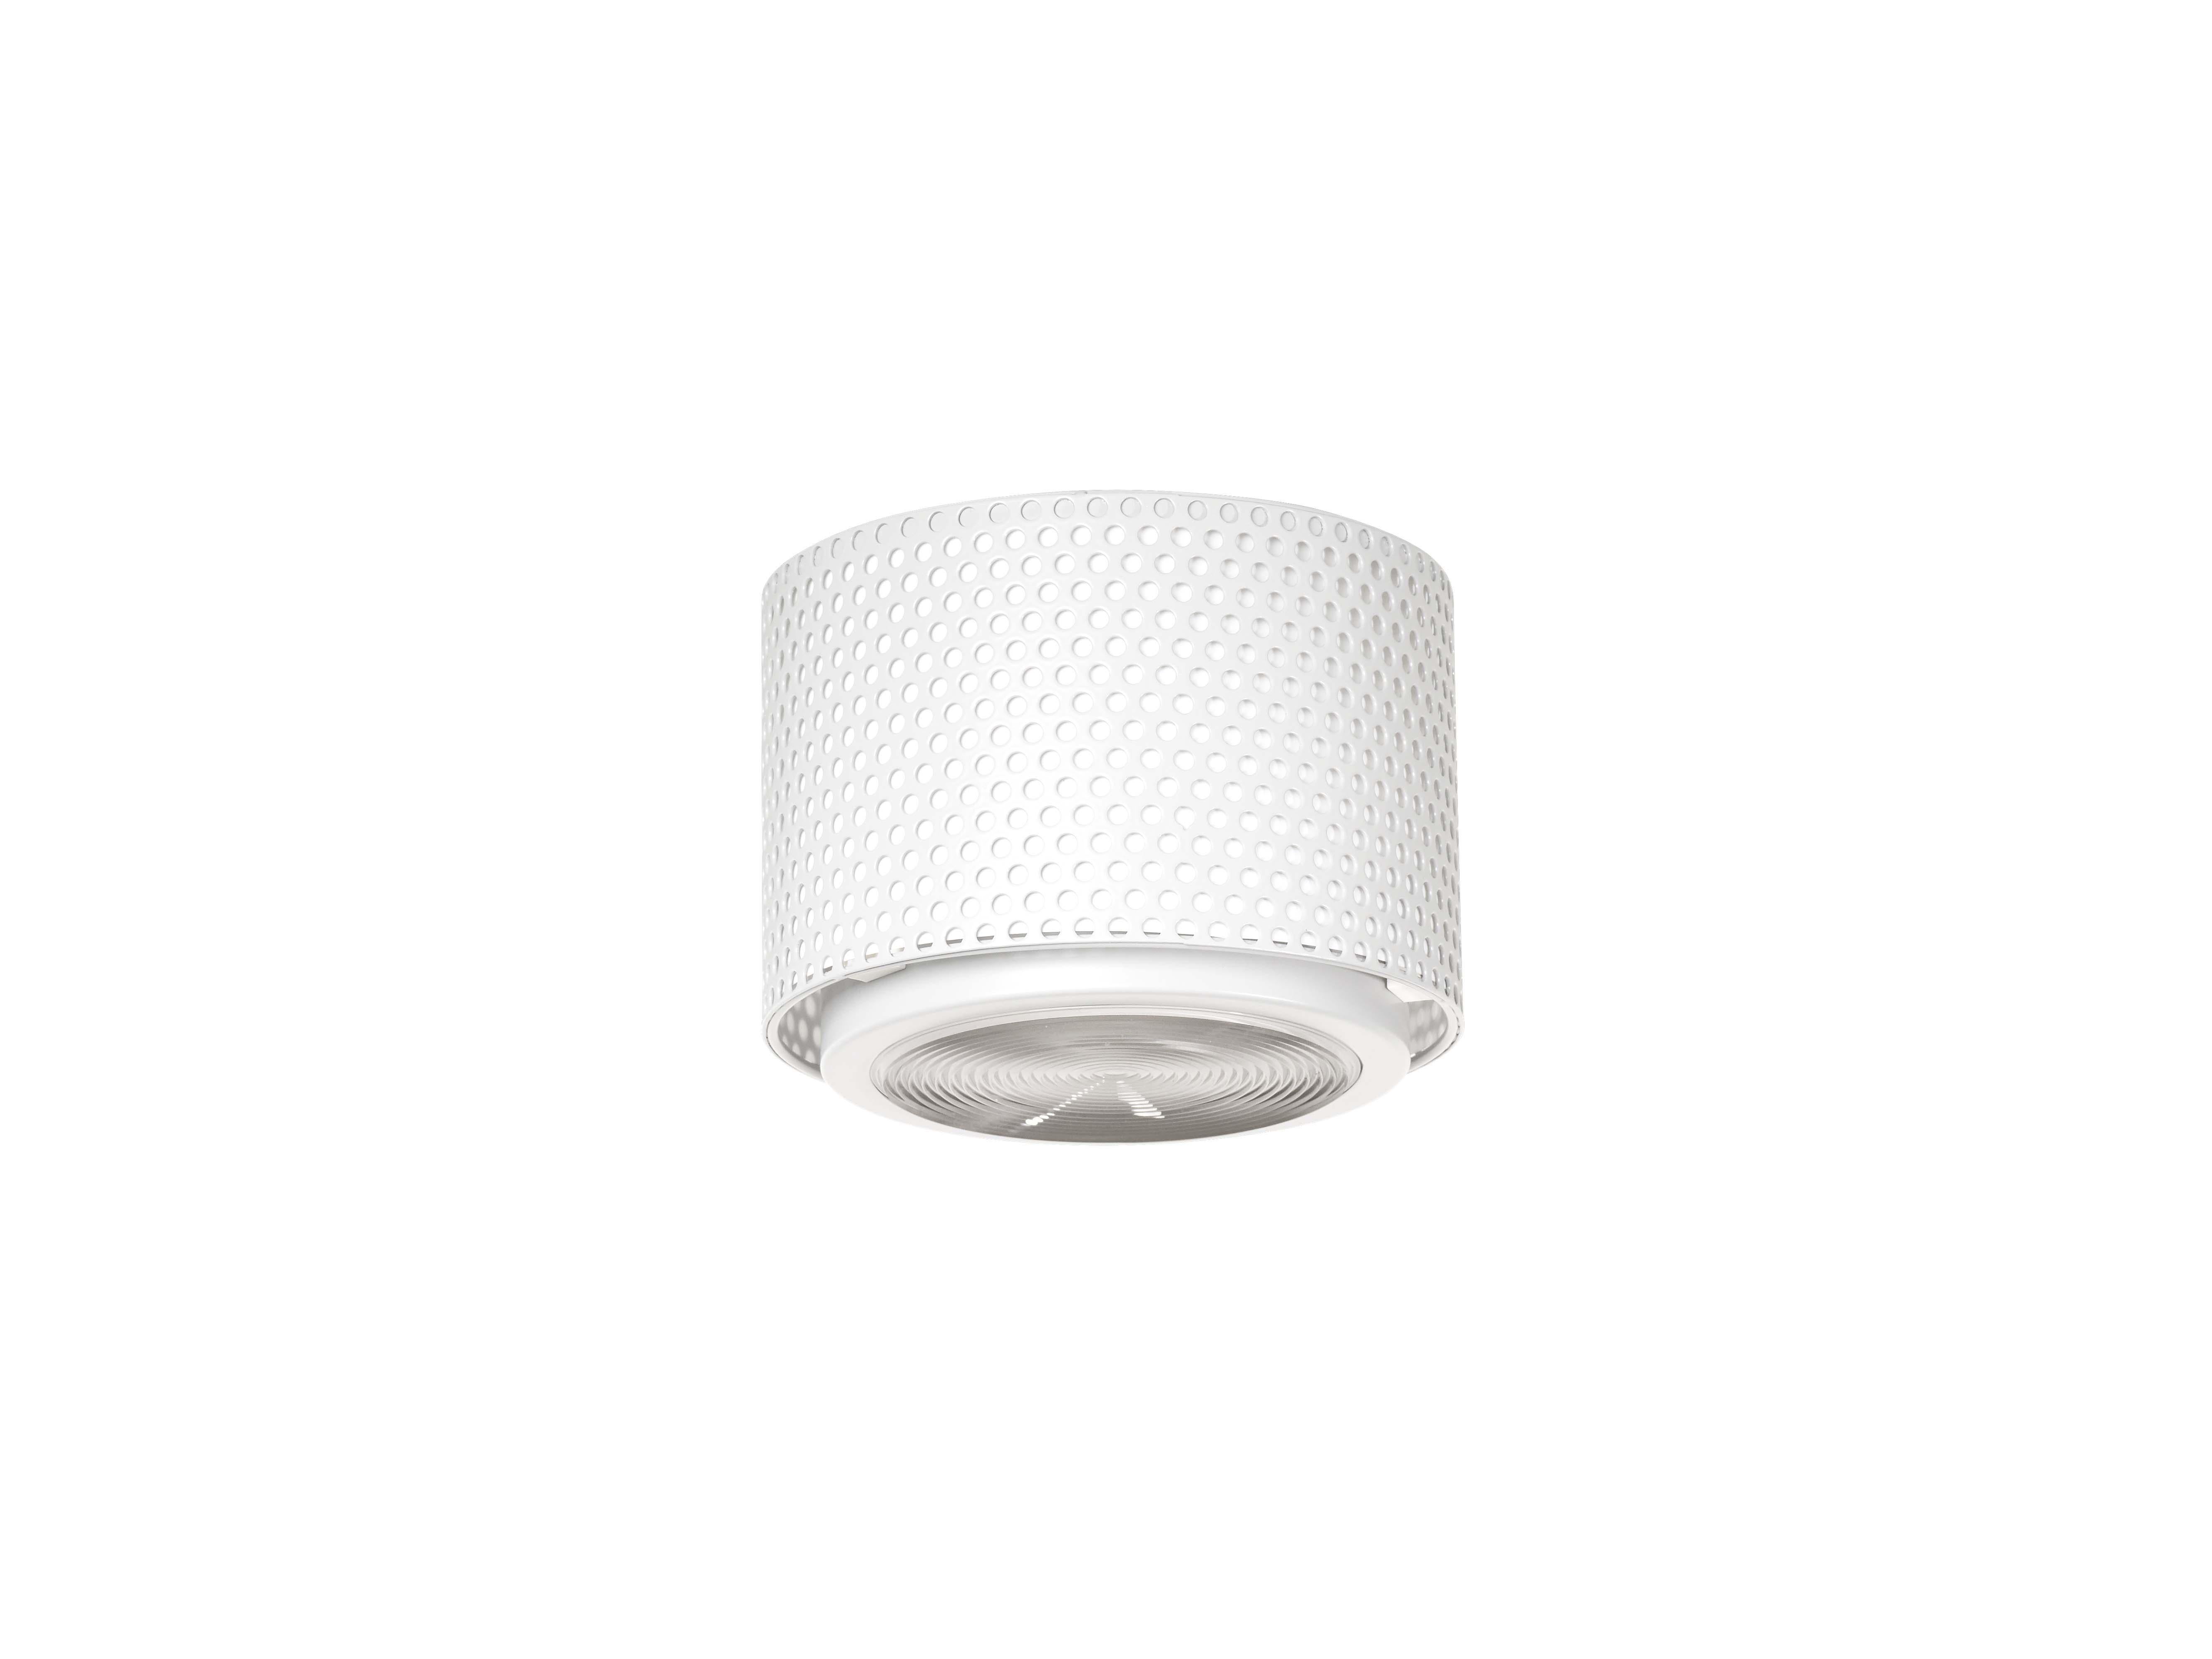 Small Pierre Guariche 'G13' Wall or Ceiling Light for Sammode Studio in Gray For Sale 6